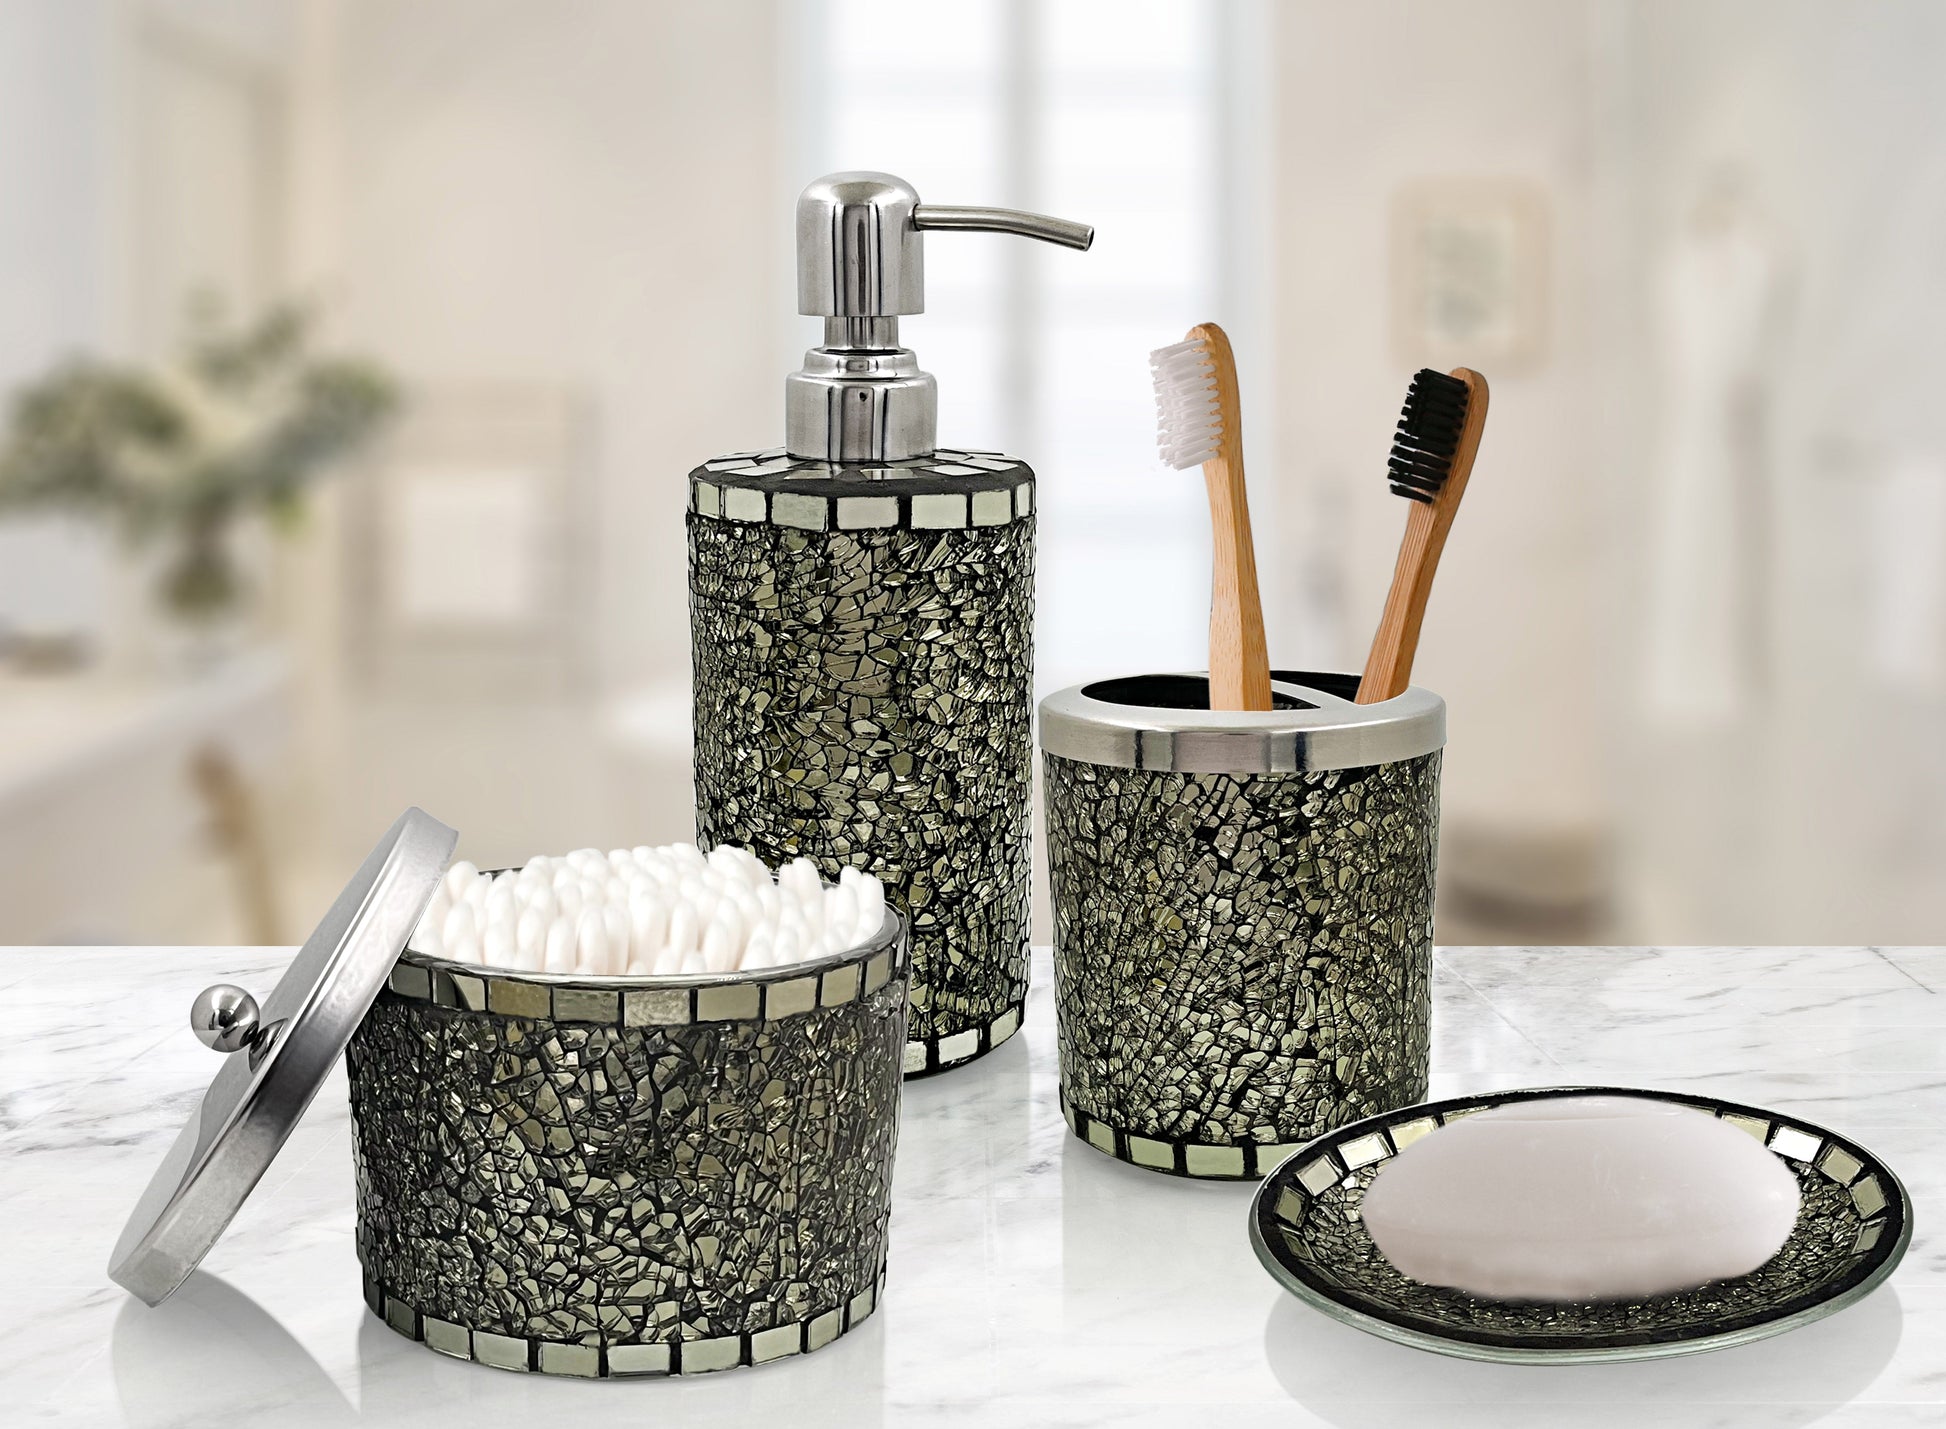 4-Piece Luxury Bath Accessory Set with Stunning Sequin Accents in Blac